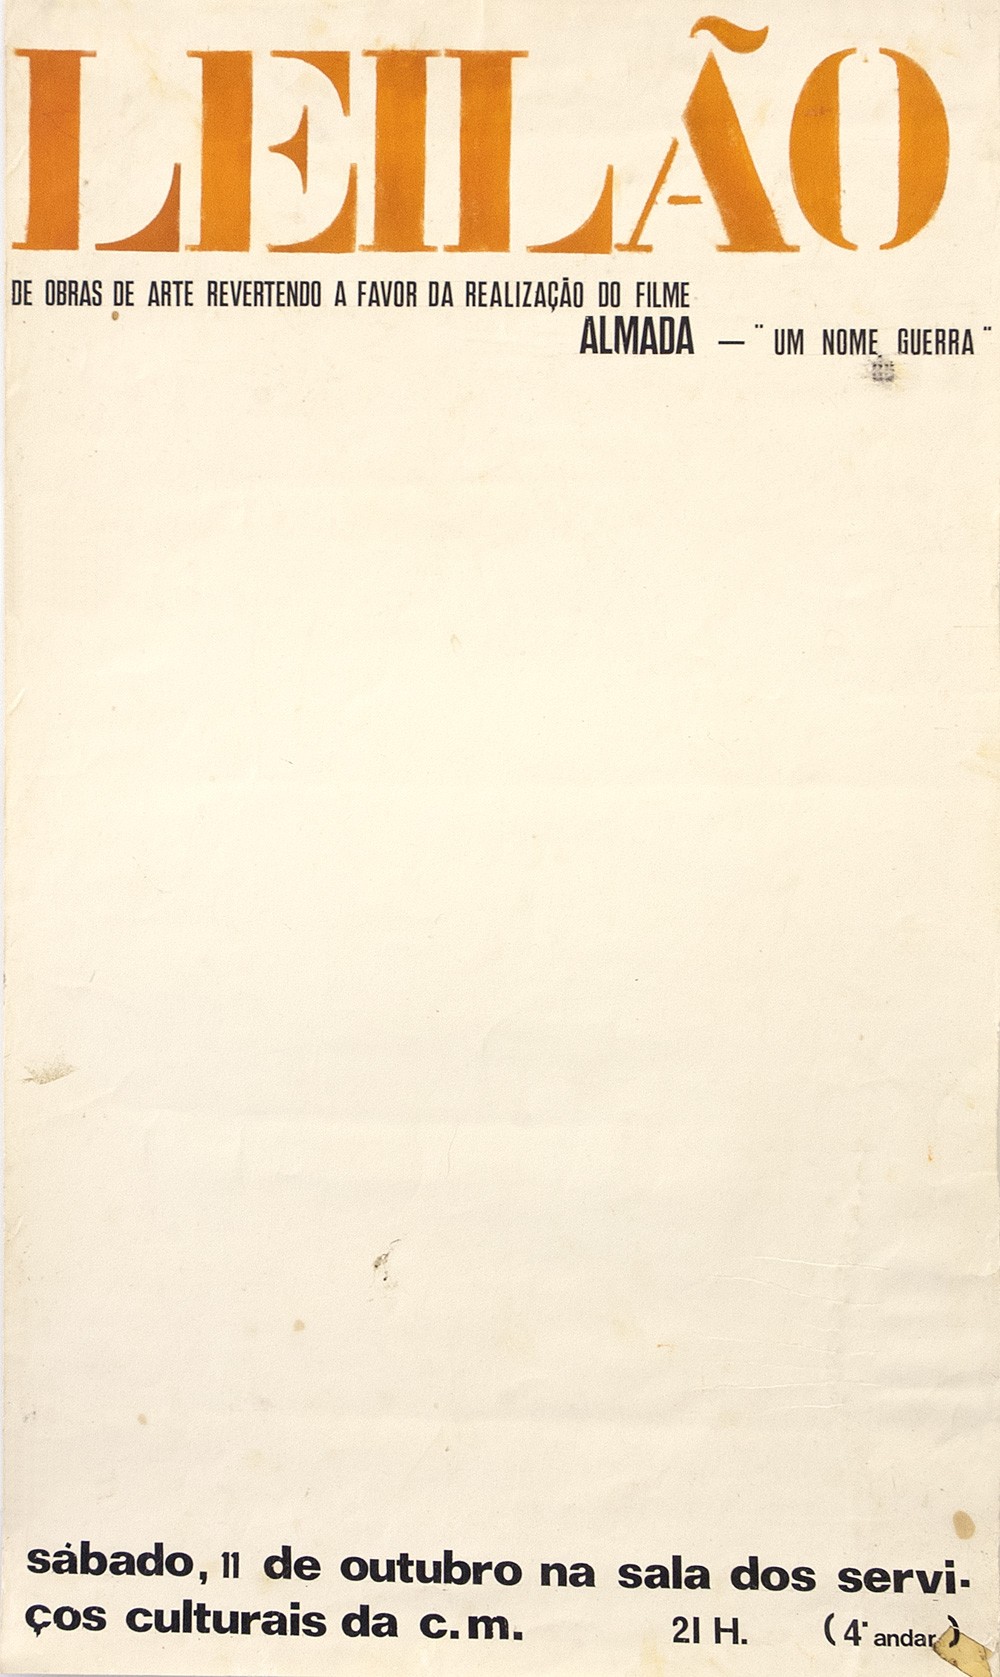  Poster for the auction of works donated by artists to fund the film, 1968. 